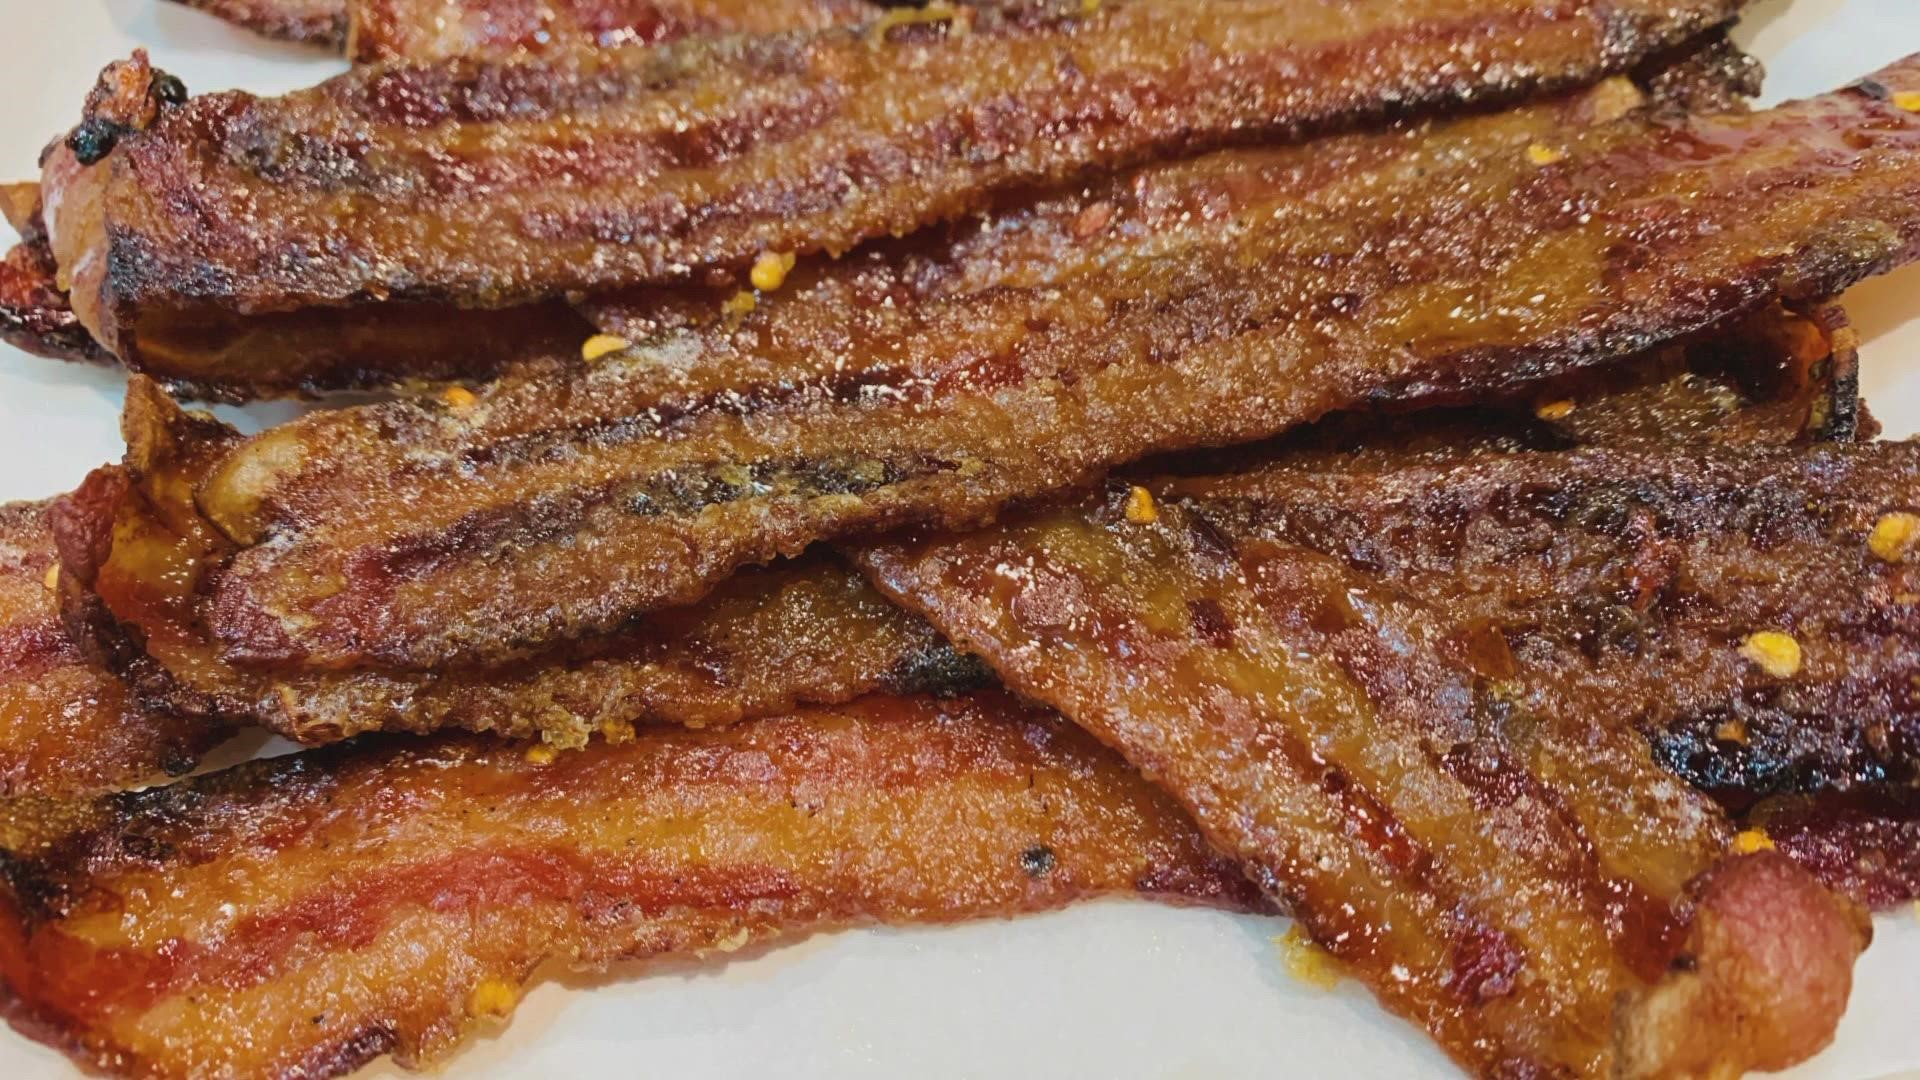 Chef Dee Lavigne of the Southern Food and Beverage Museum shows how to make a unique candied bacon recipe. More info: southernfood.org.